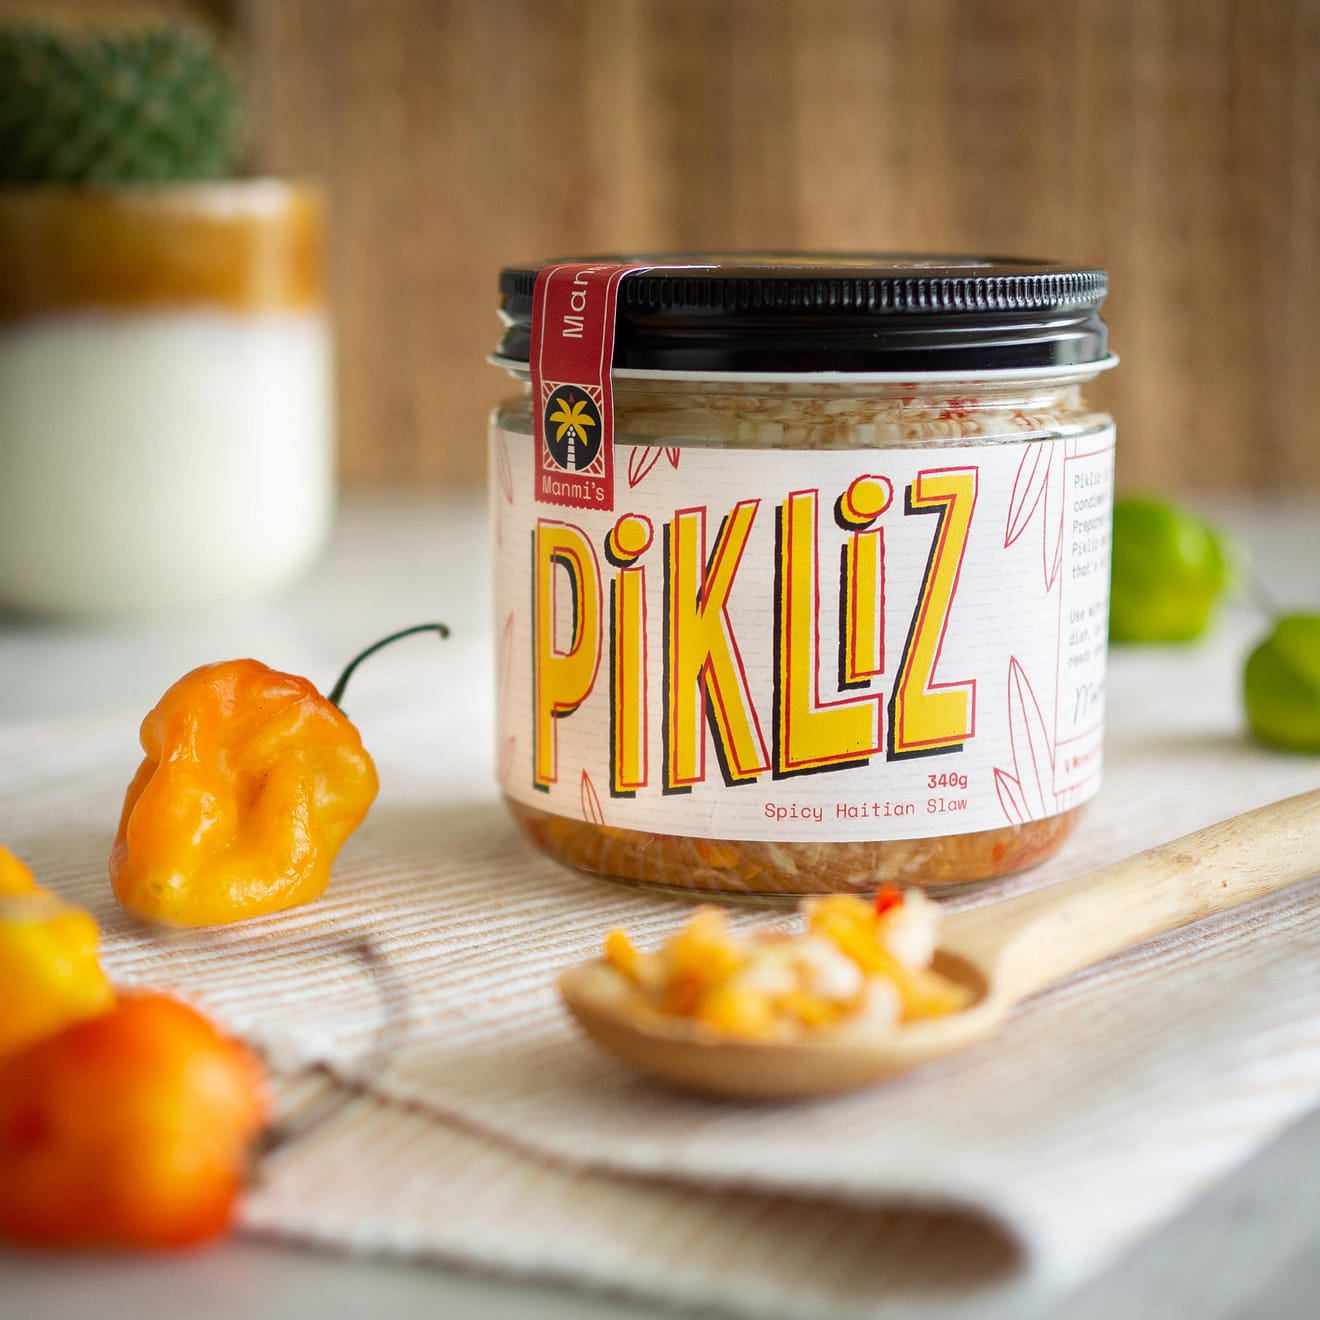 A jar of Pikliz with some scotch bonnet peppers scattered beside it